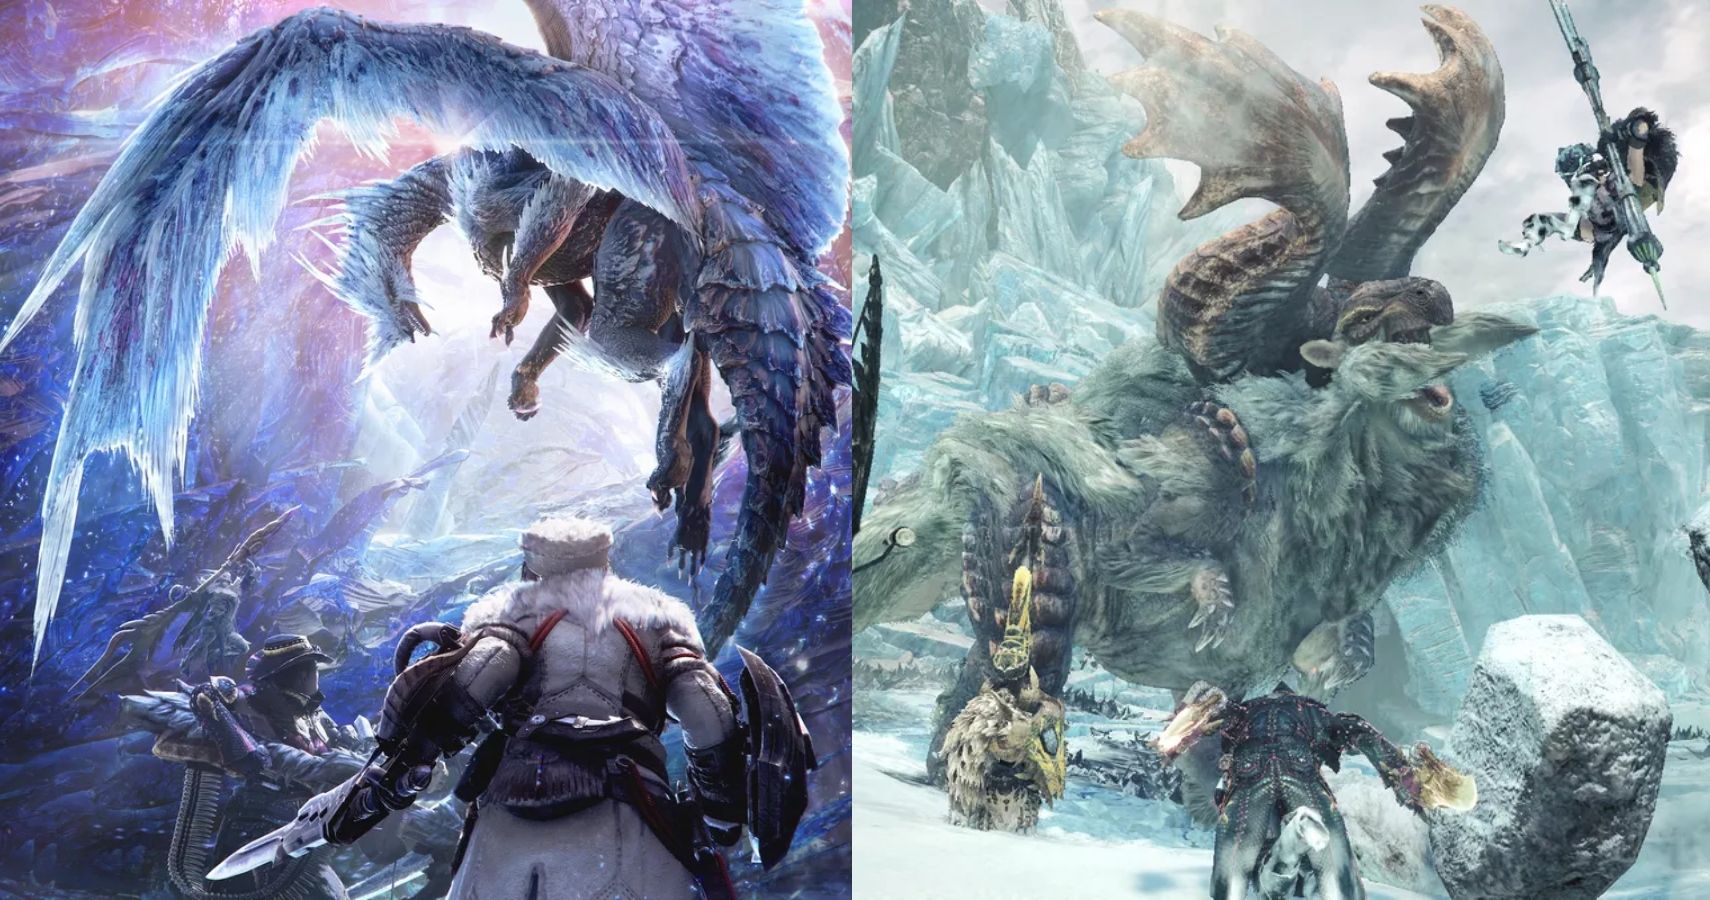 5 Things I Can't Wait to Explore in Monster Hunter World